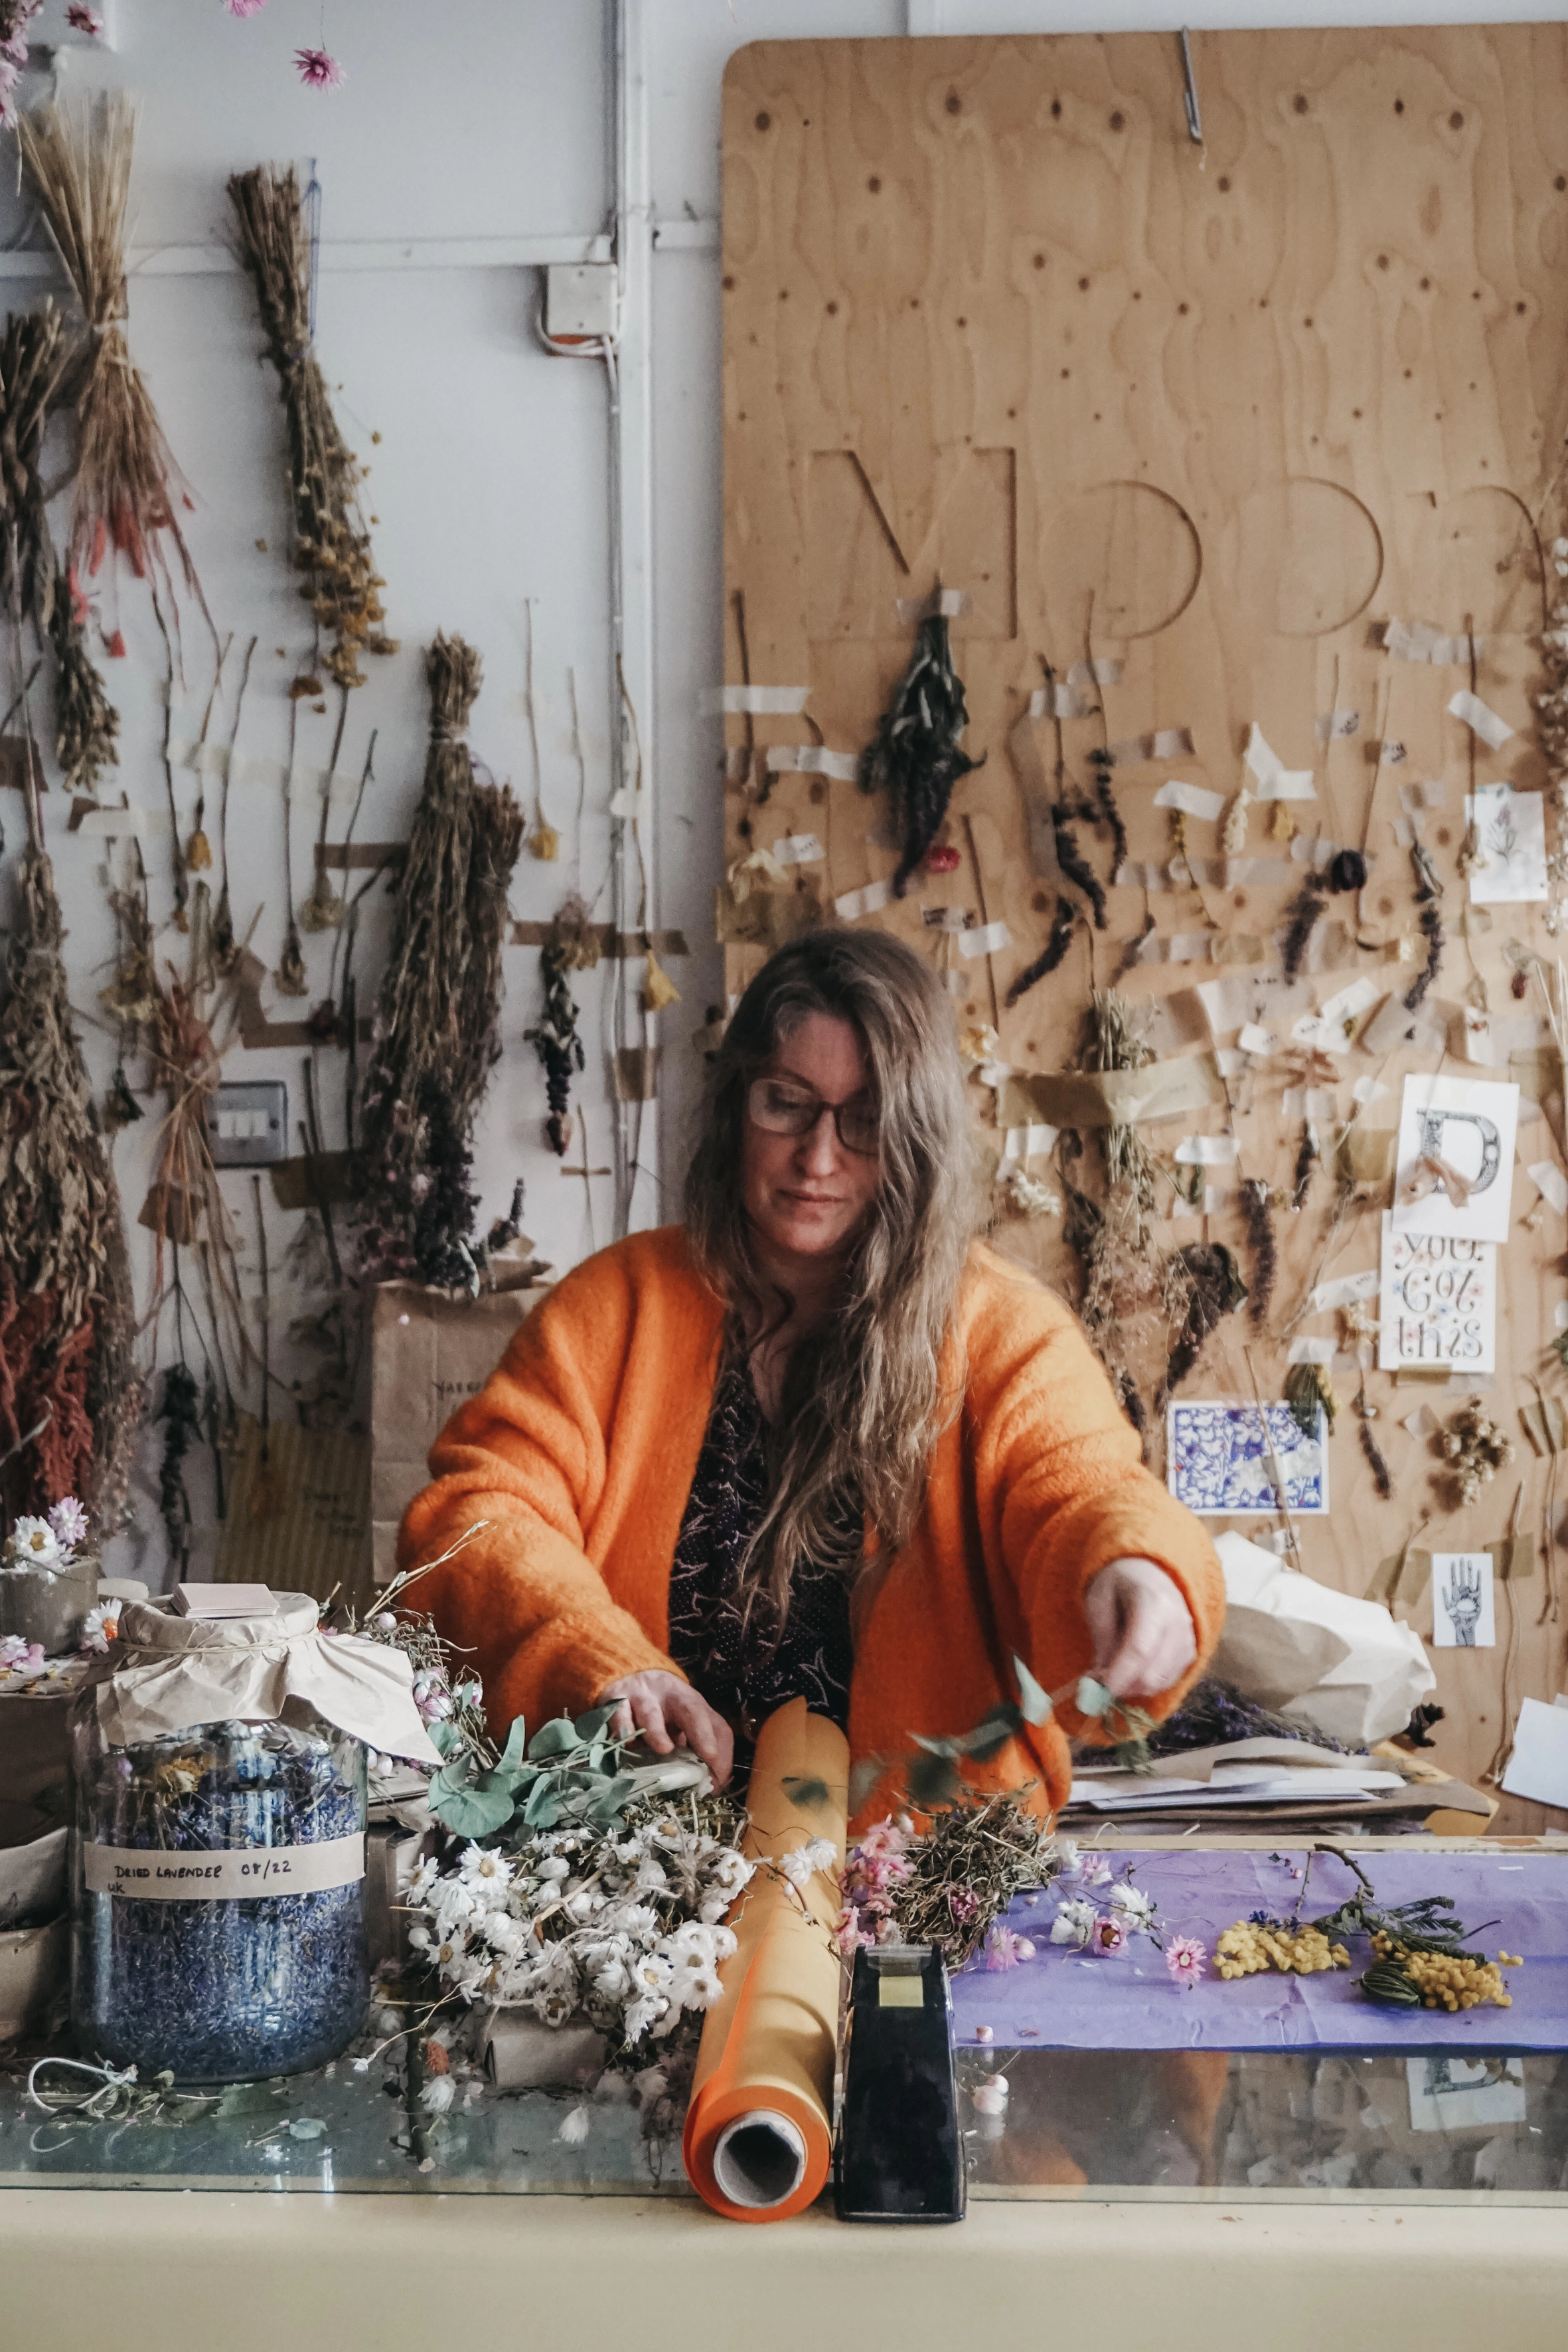 Deborah-Maire Moon standing at a counter, wearing an orange cardigan, making dried flower bouquets.